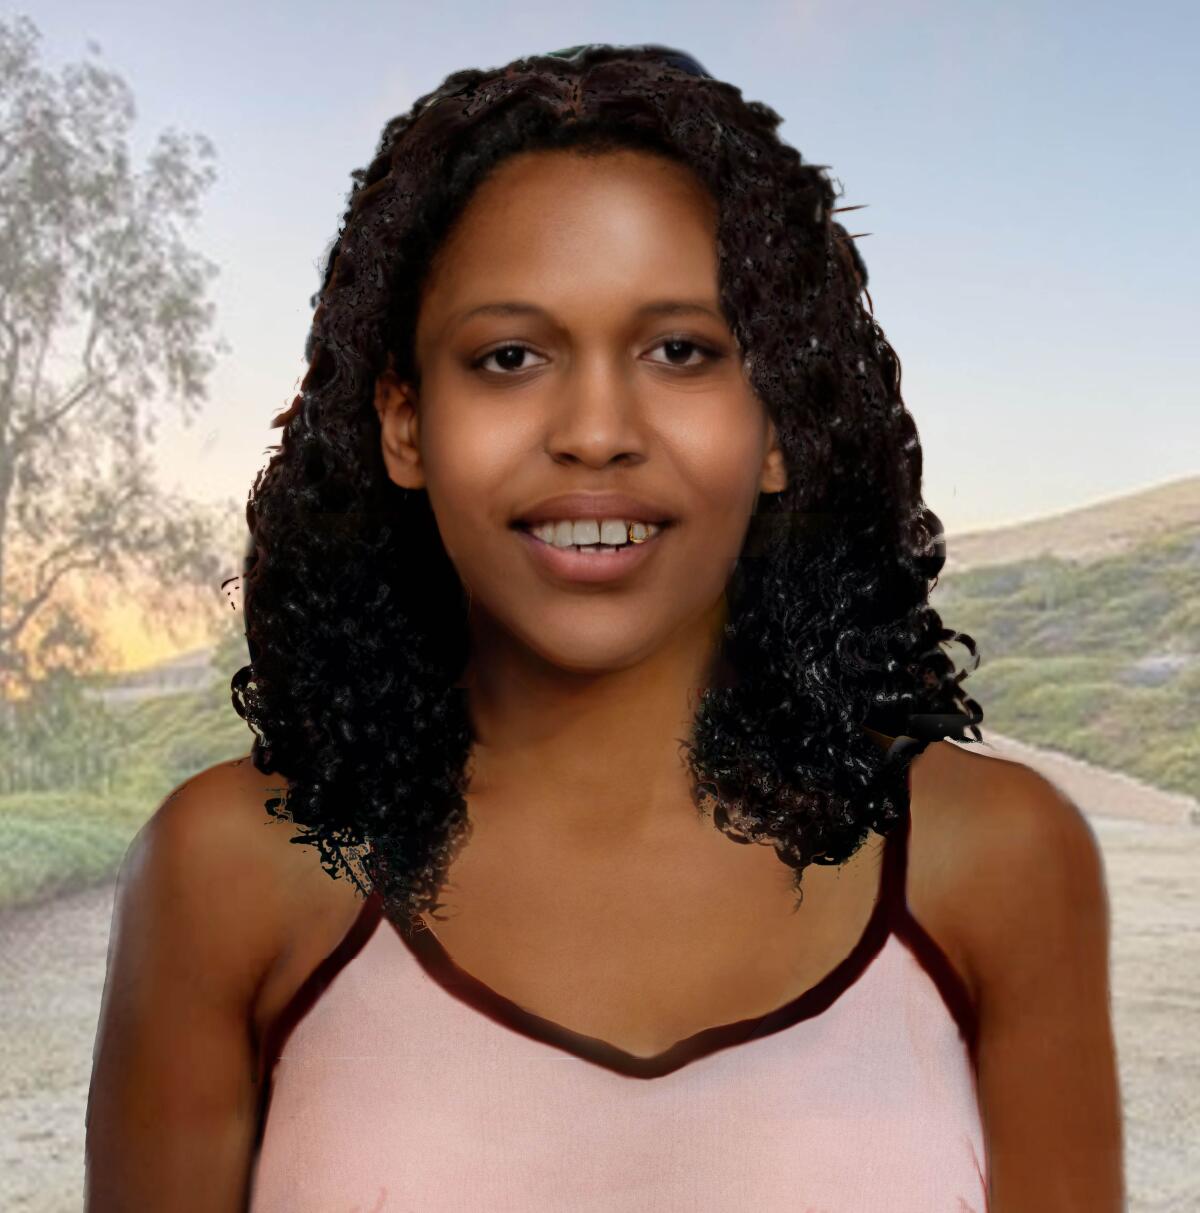 The Orange County Sheriff’s Department released a new rendering last week of a Jane Doe